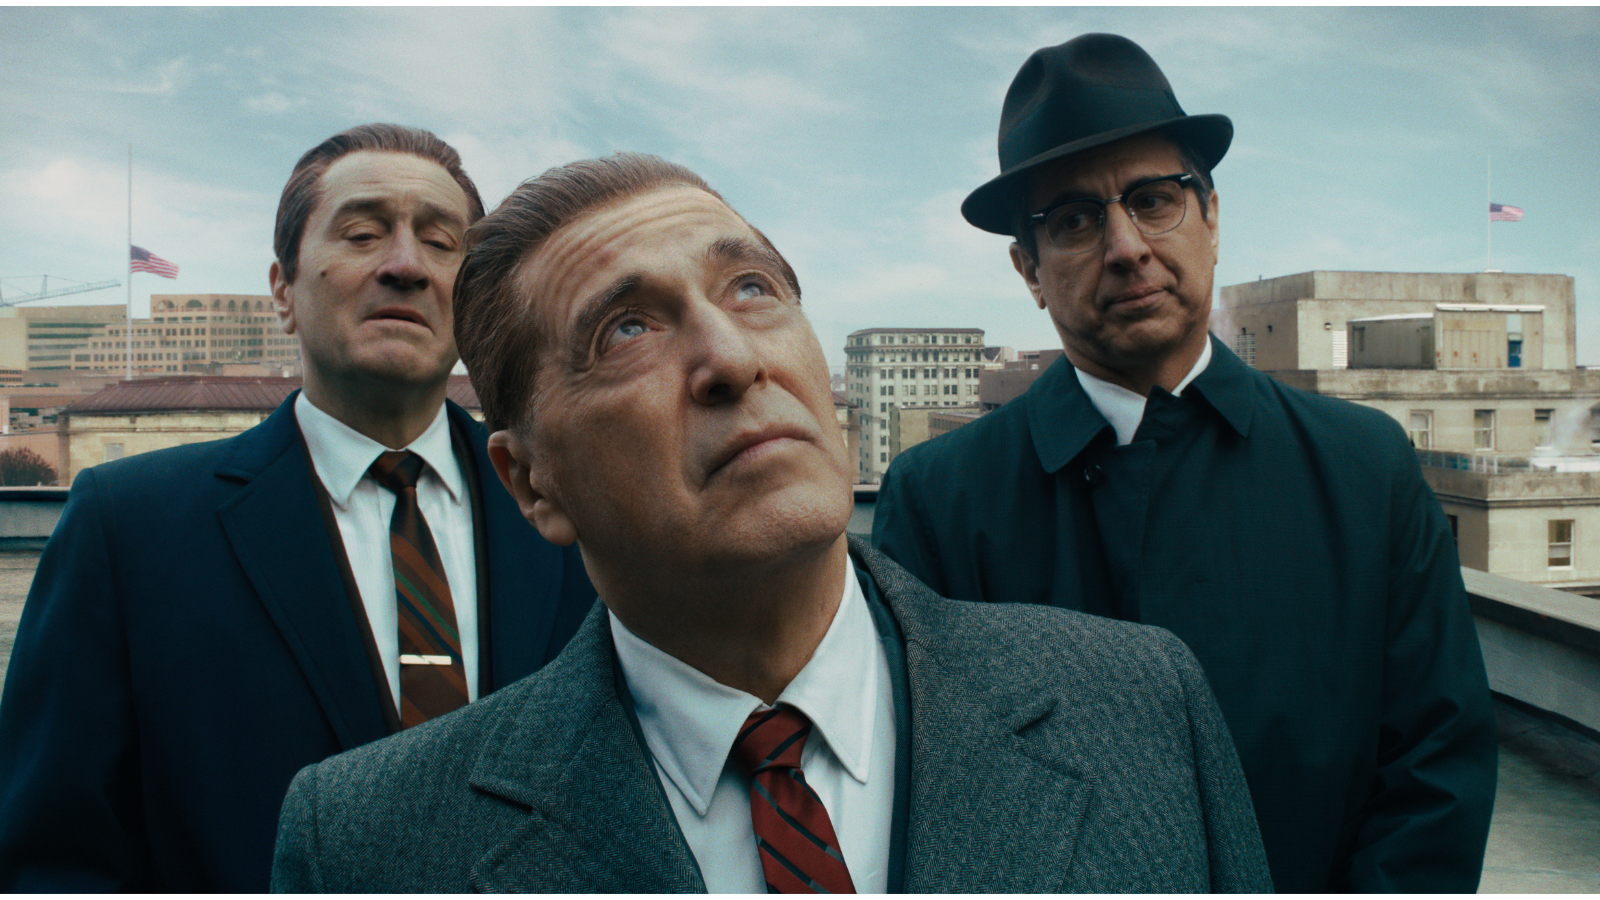 <p>Martin Scorcese may be one of the greatest directors of all time, but let’s be honest: <em>The Irishman </em>is an hour longer than needed. As great as the cast, headlined by Robert DeNiro and Joe Pesci, work together, we can only be so patient. </p>